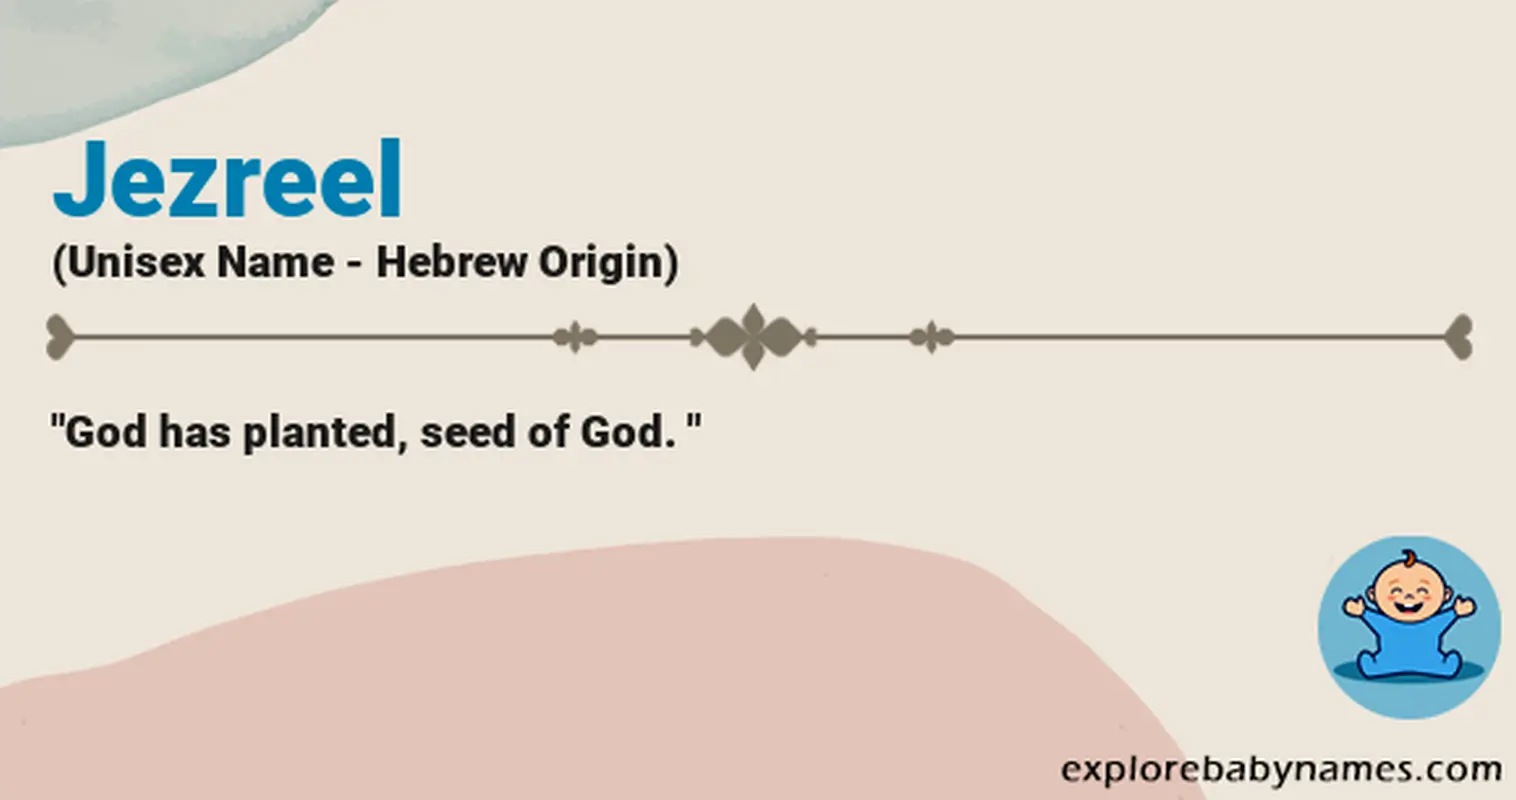 Meaning of Jezreel